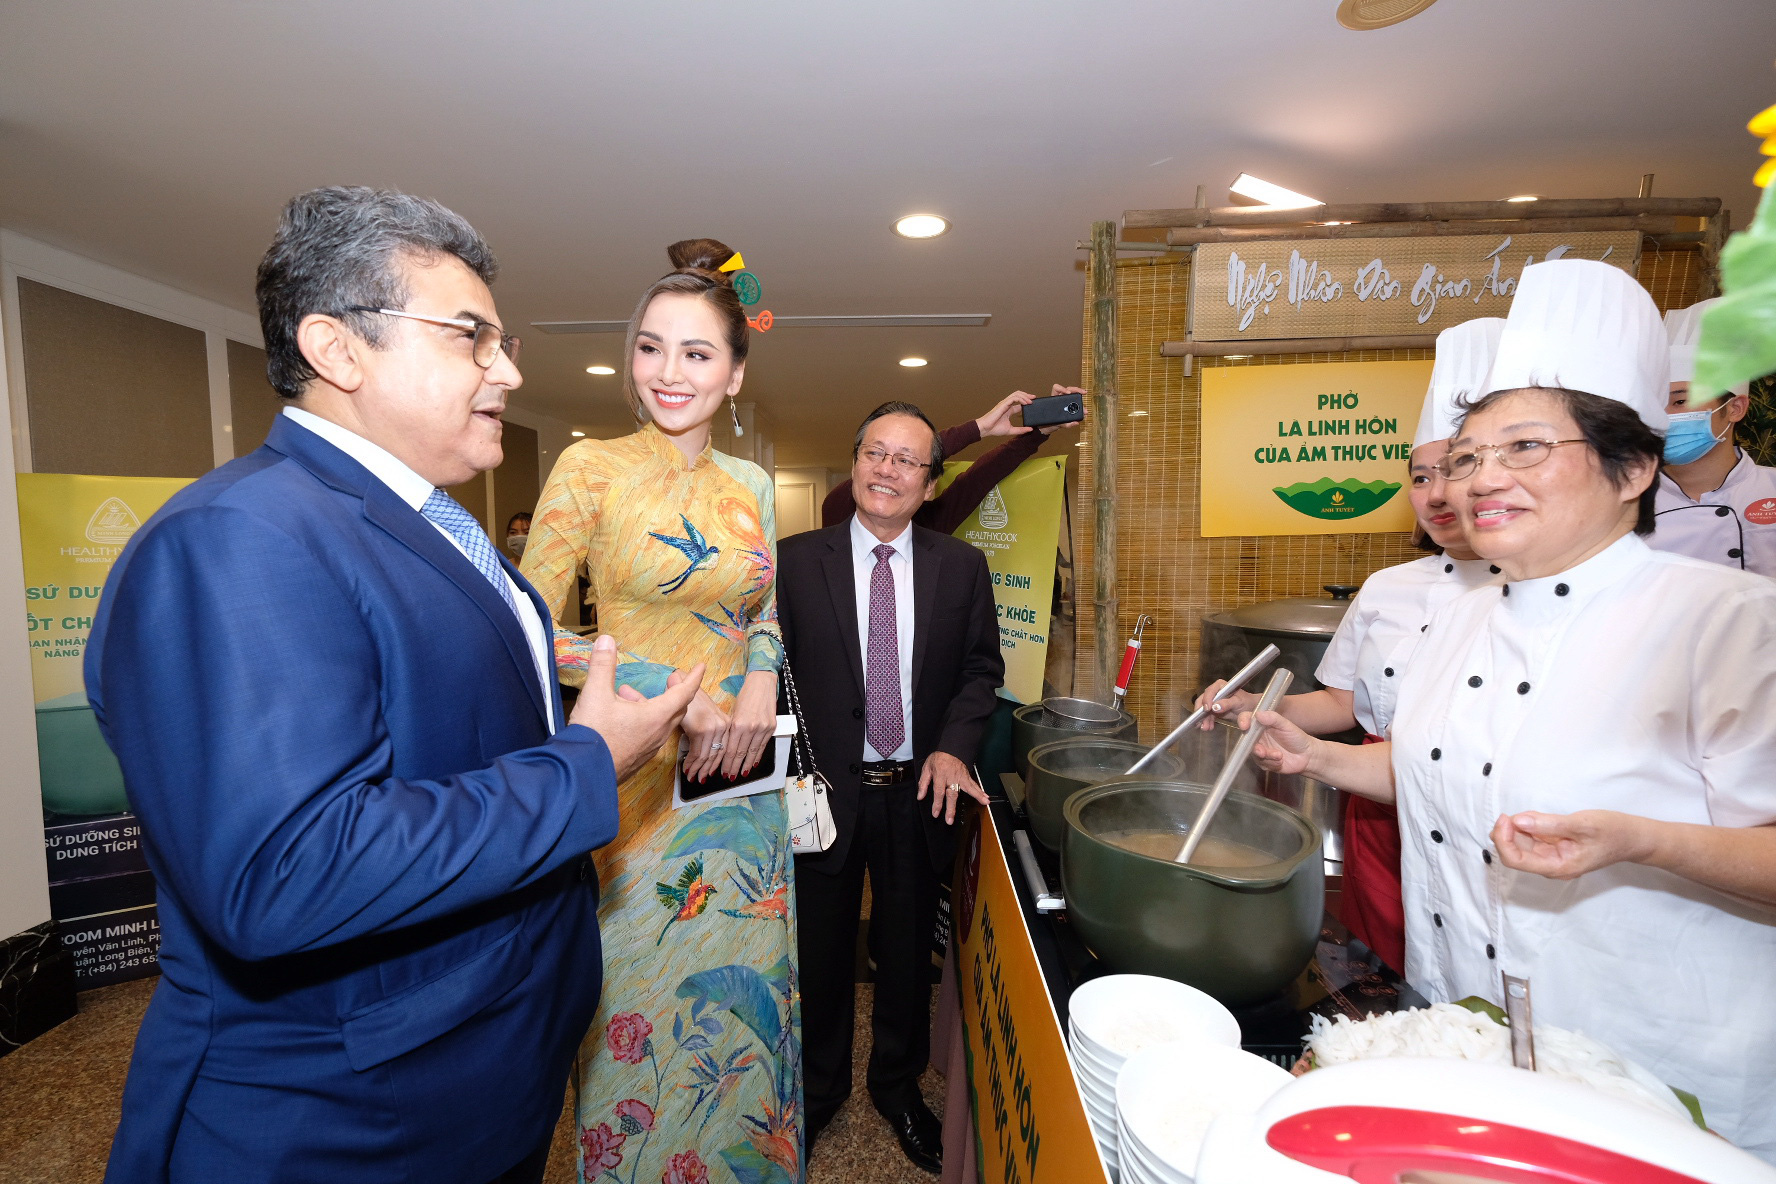 ‘The Story of Pho’ gala dinner organized for diplomatic missions in Hanoi